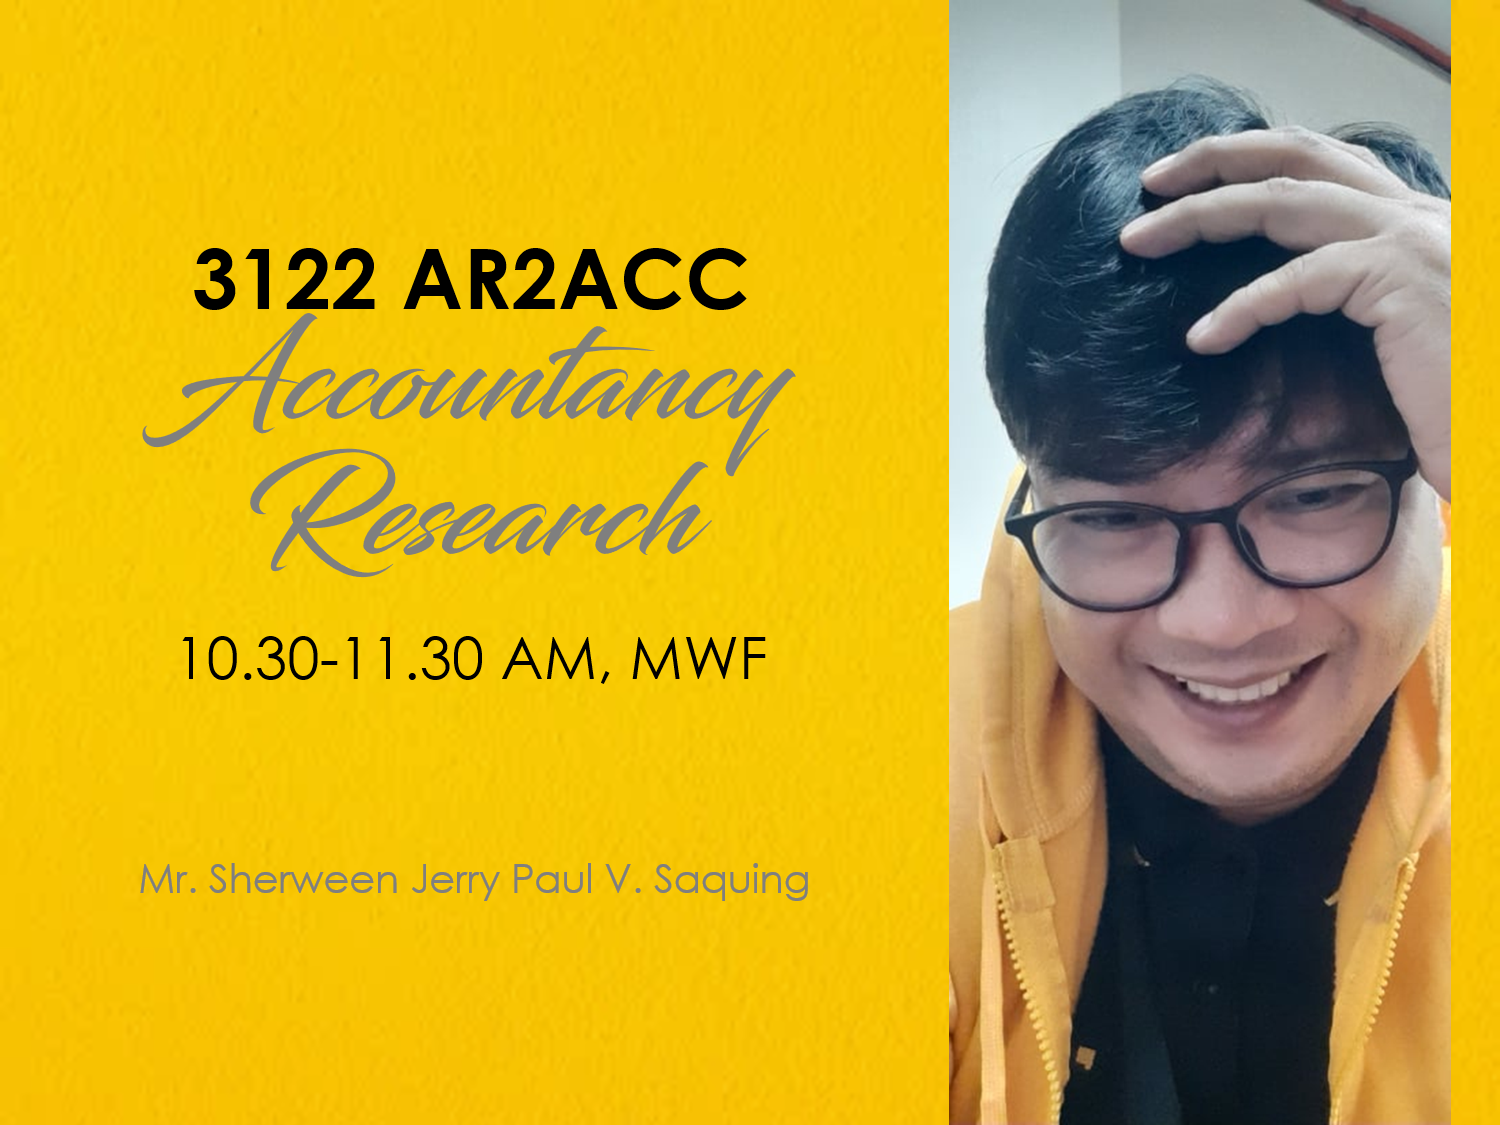 Accountancy Research